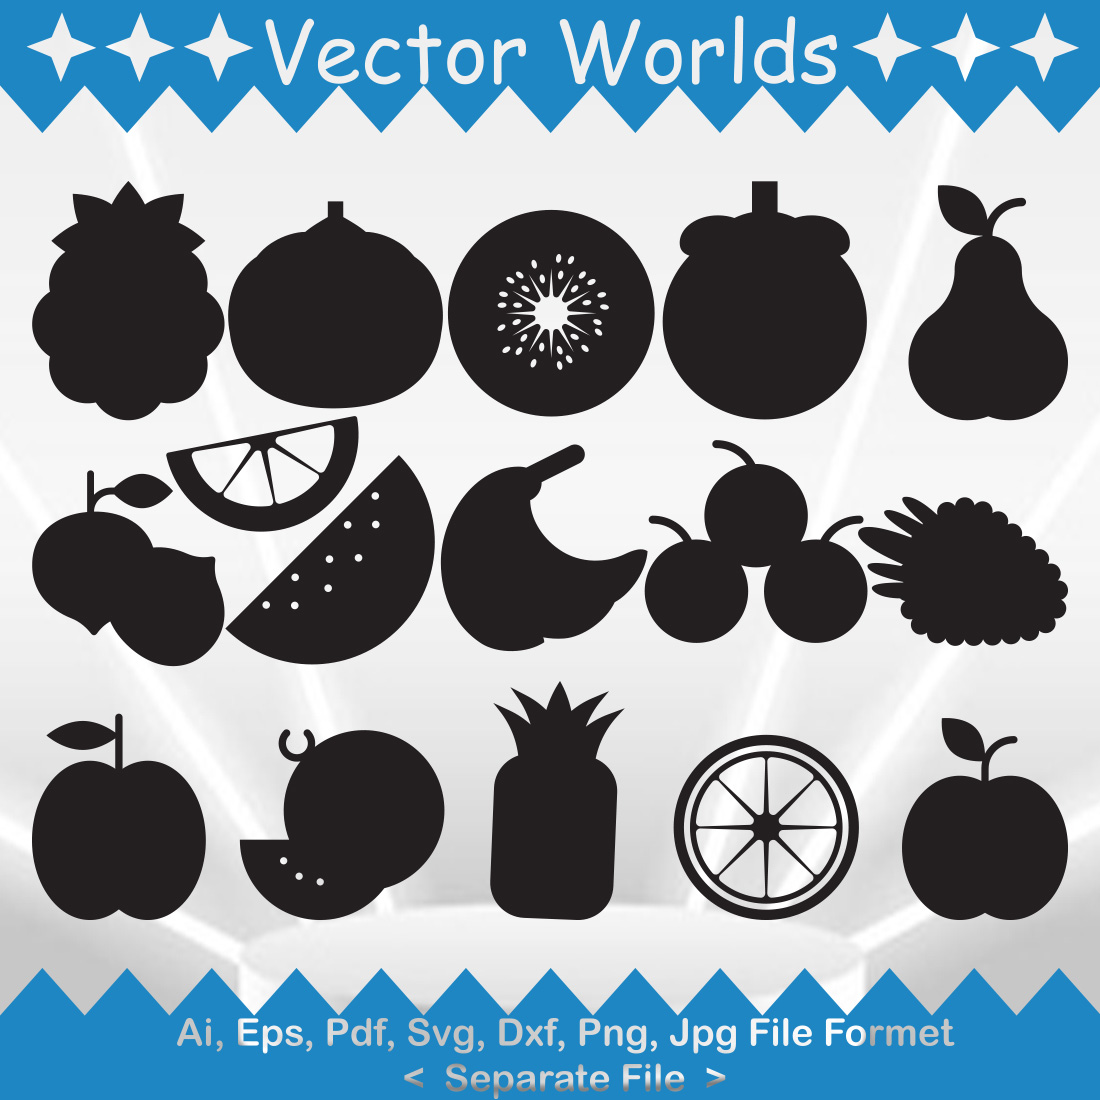 A collection of gorgeous fruit silhouette images